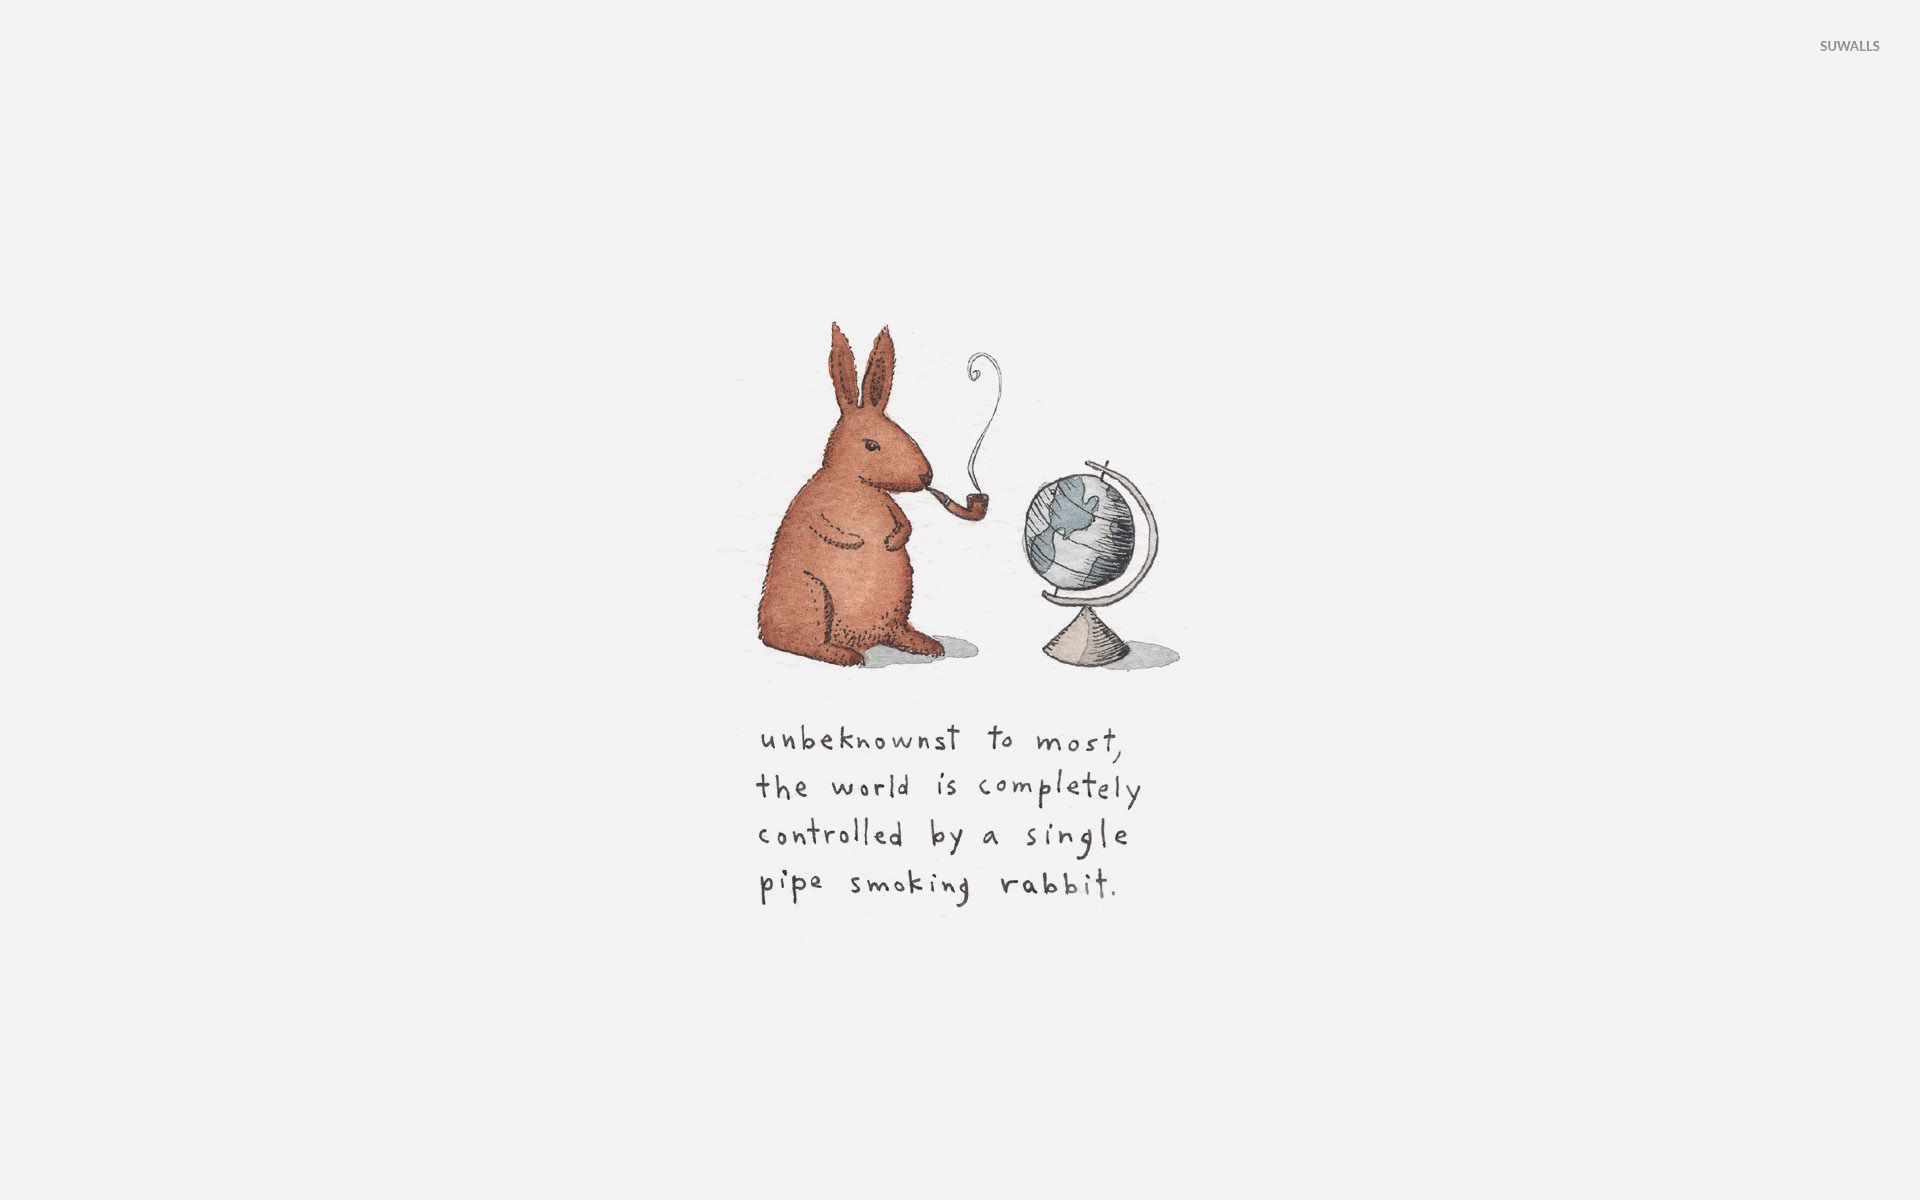 World controlled by a pipe smoking rabbit wallpapers